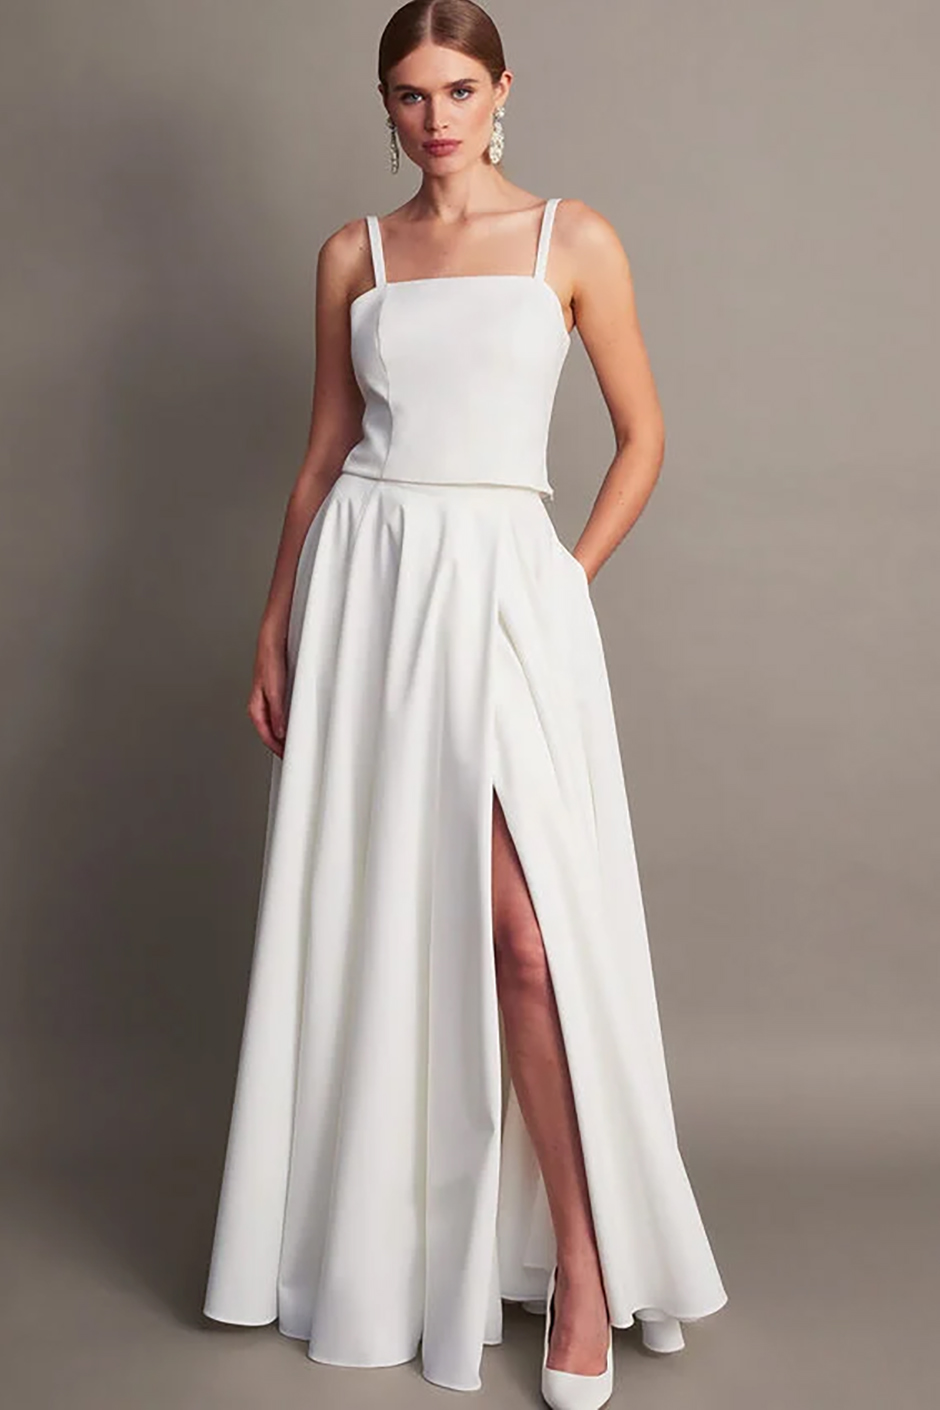 Maxi bridal skirt with pockets and statement slit from Monsoon